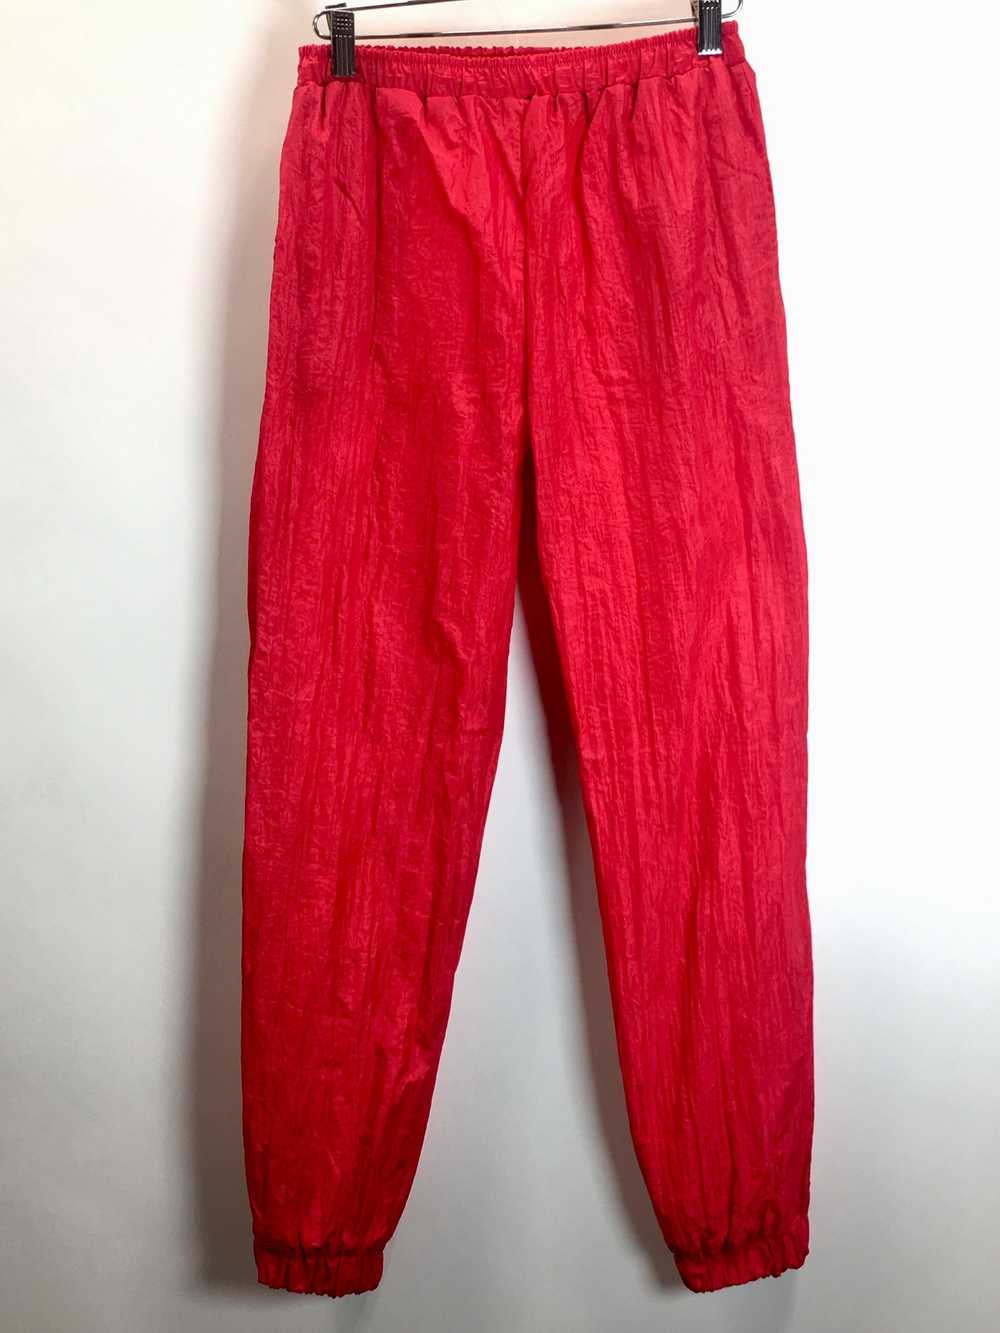 80s Teen Track Suit - image 3